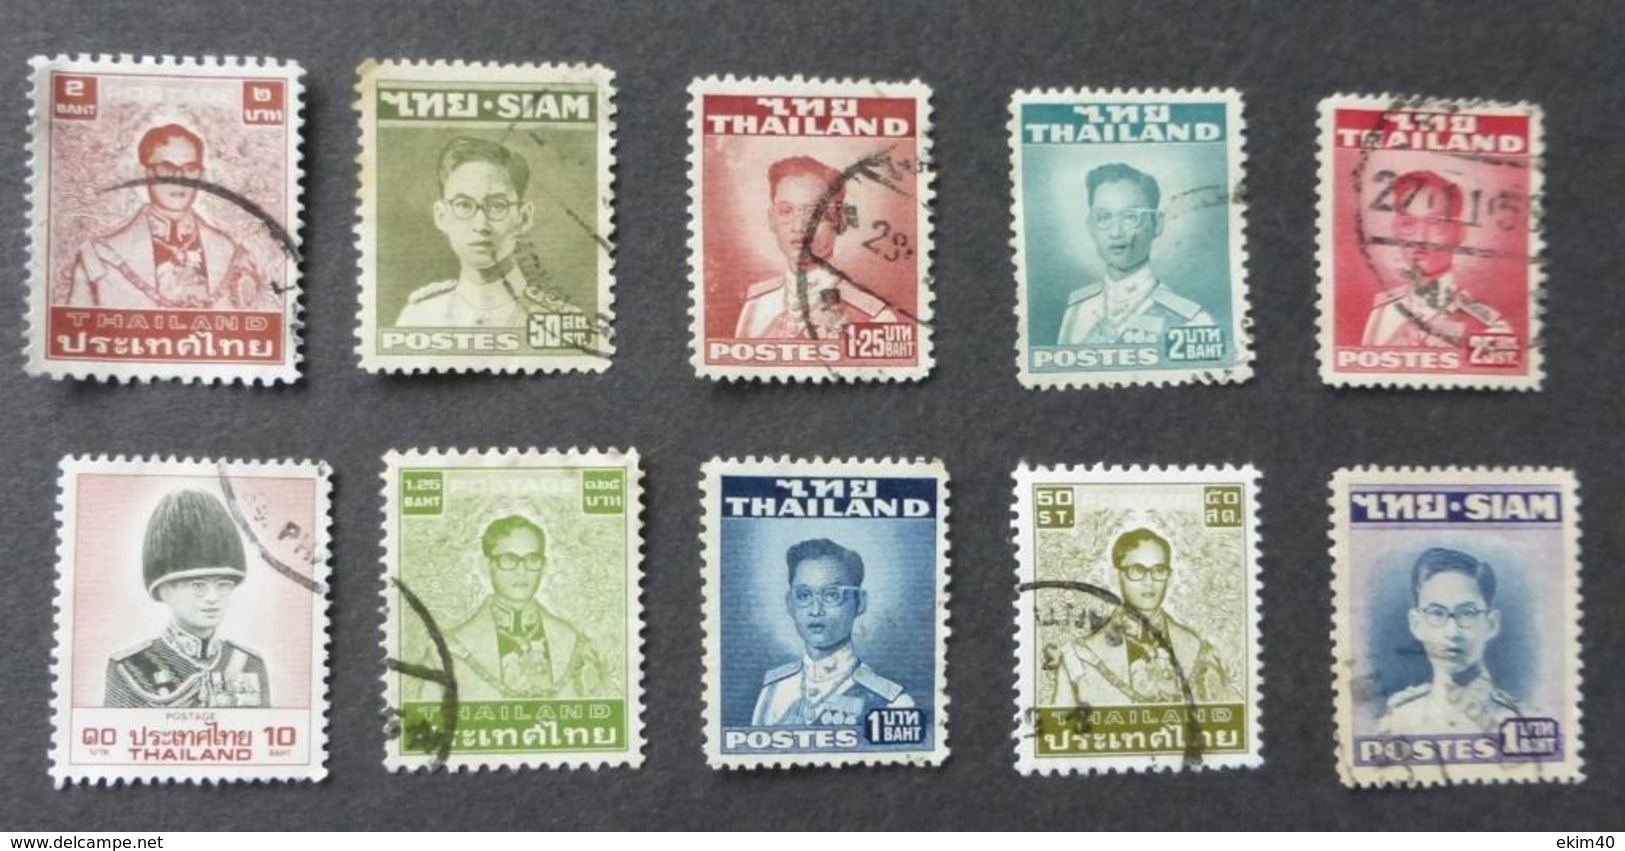 Selection Of Early Thailand/Siam Used/Cancelled Hinged Stamps- Various Issues No DK-609 - Thaïlande